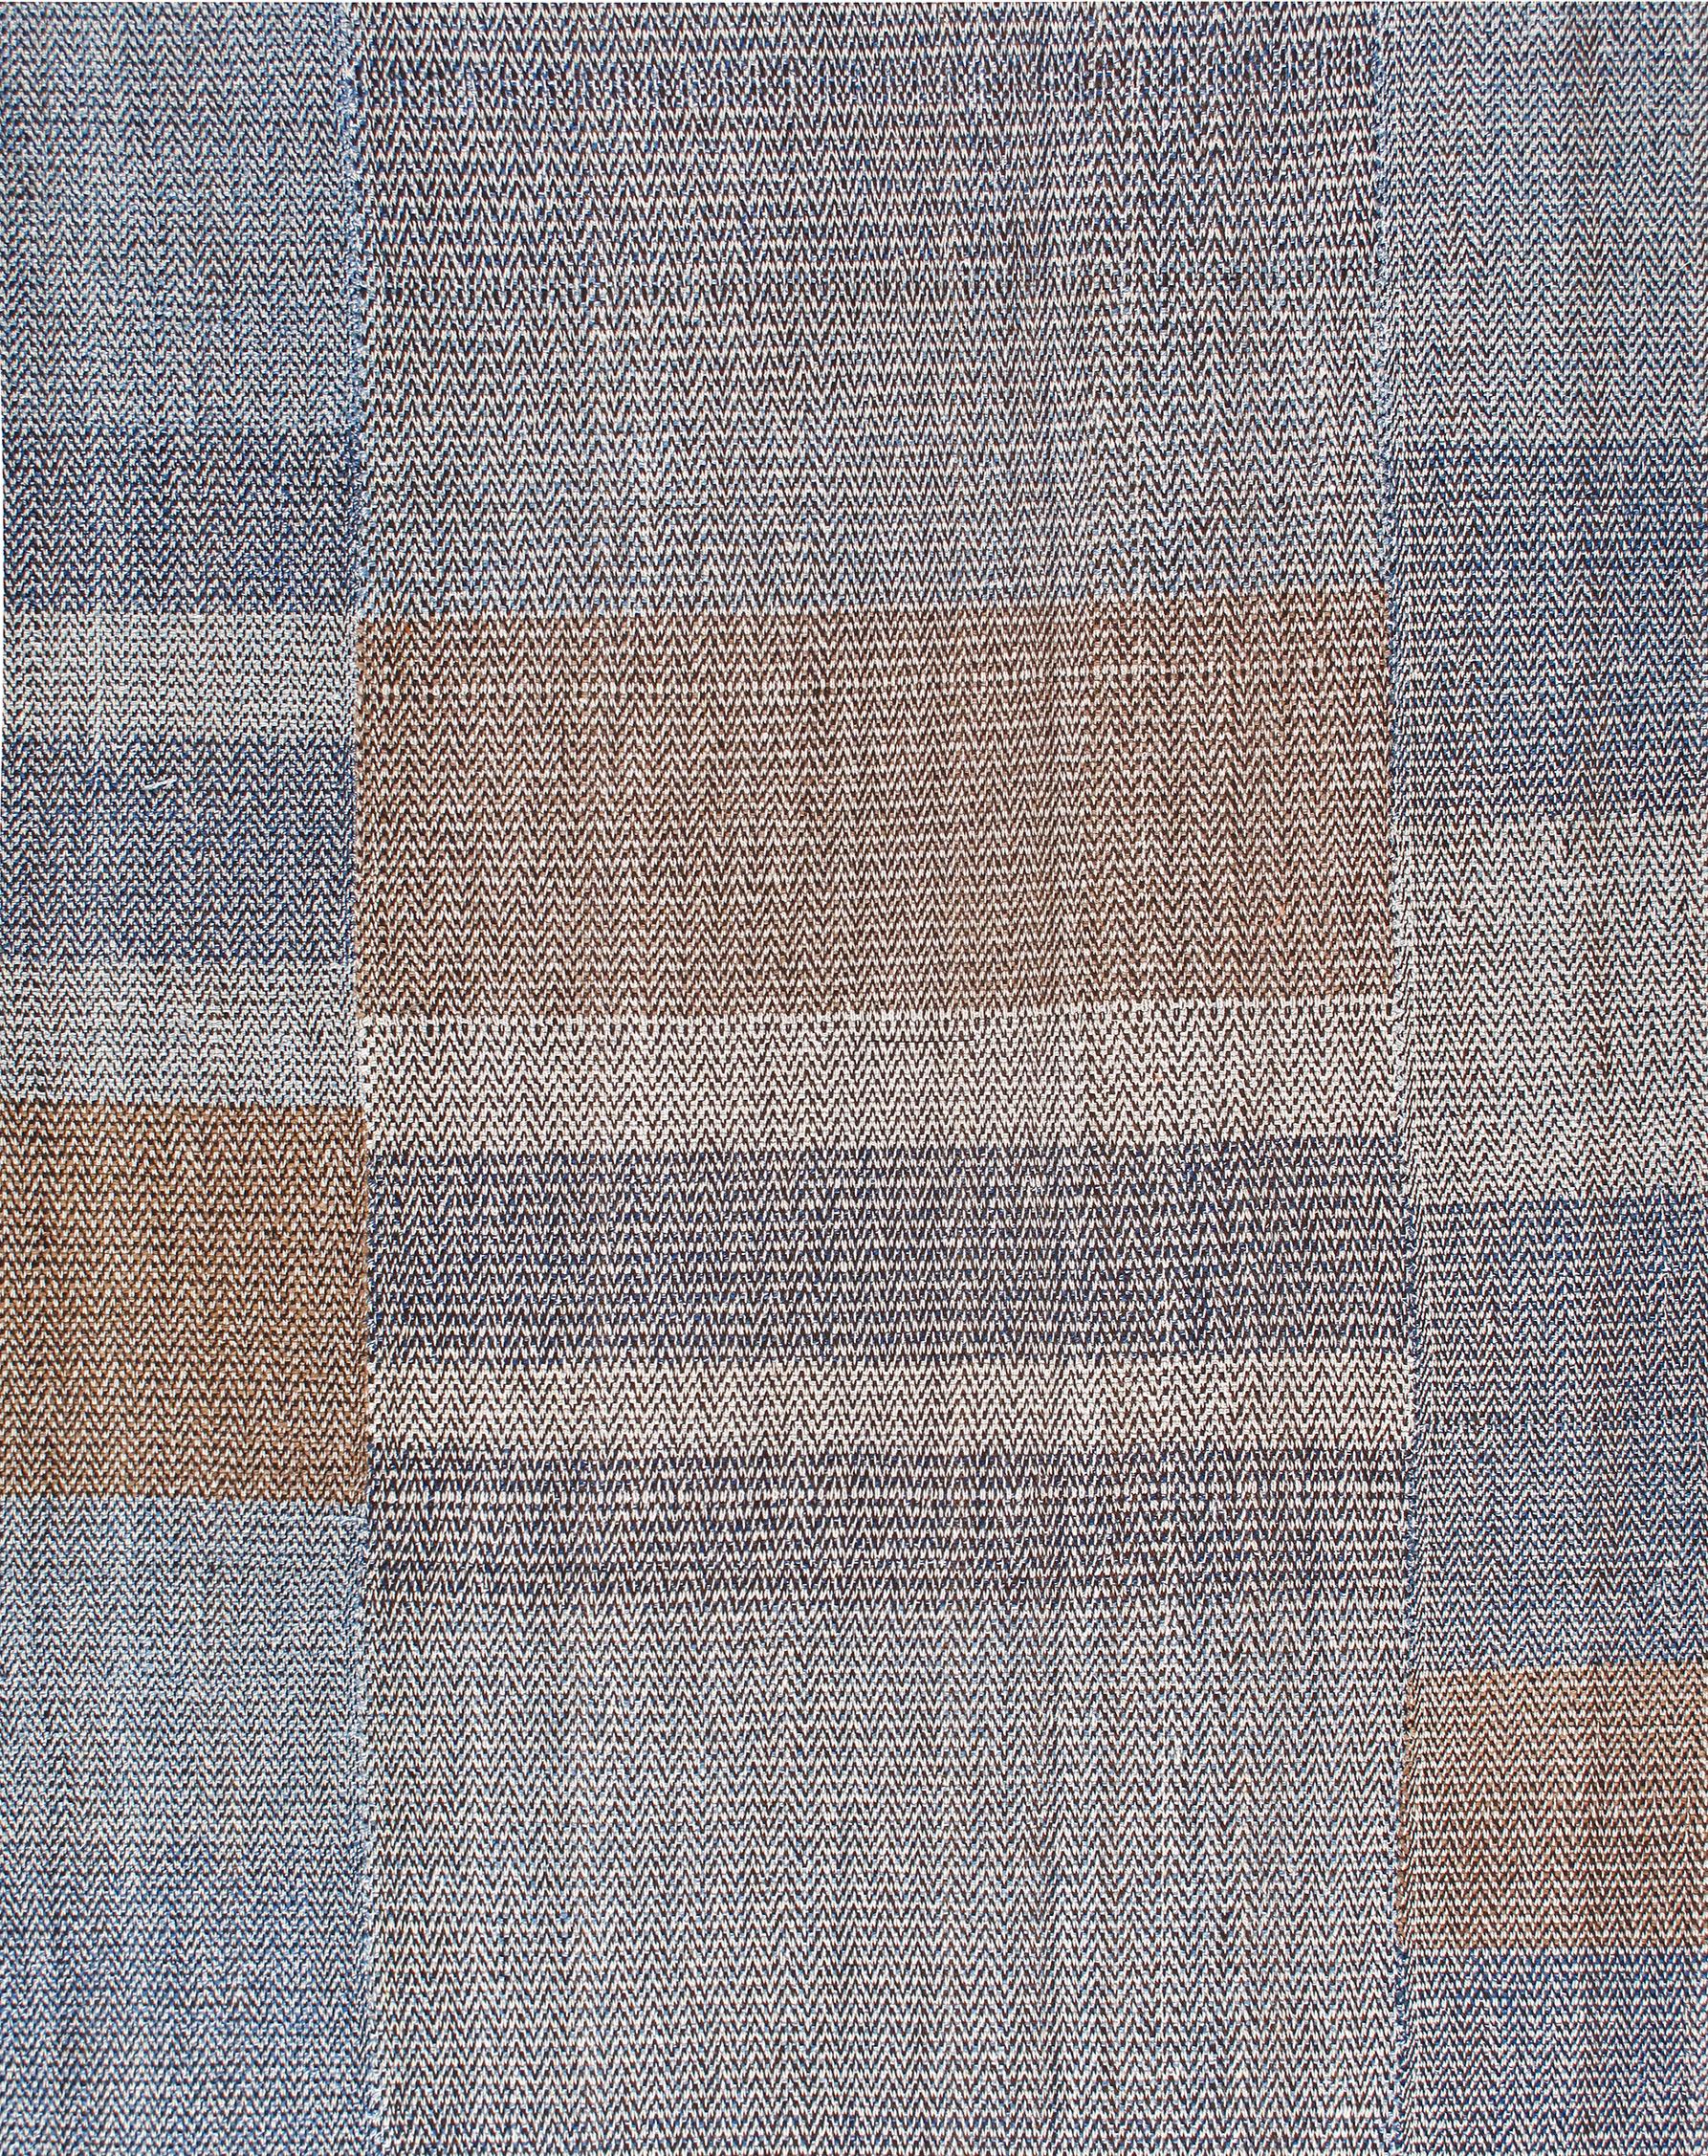 This Charmo flatweave rug is made with handspun wool and natural dyes. Its mid-century modern style is handwoven by skilled artisans interlocking the warp and weft threads on a loom. Our flatweaves are durable, lightweight and suitable for any